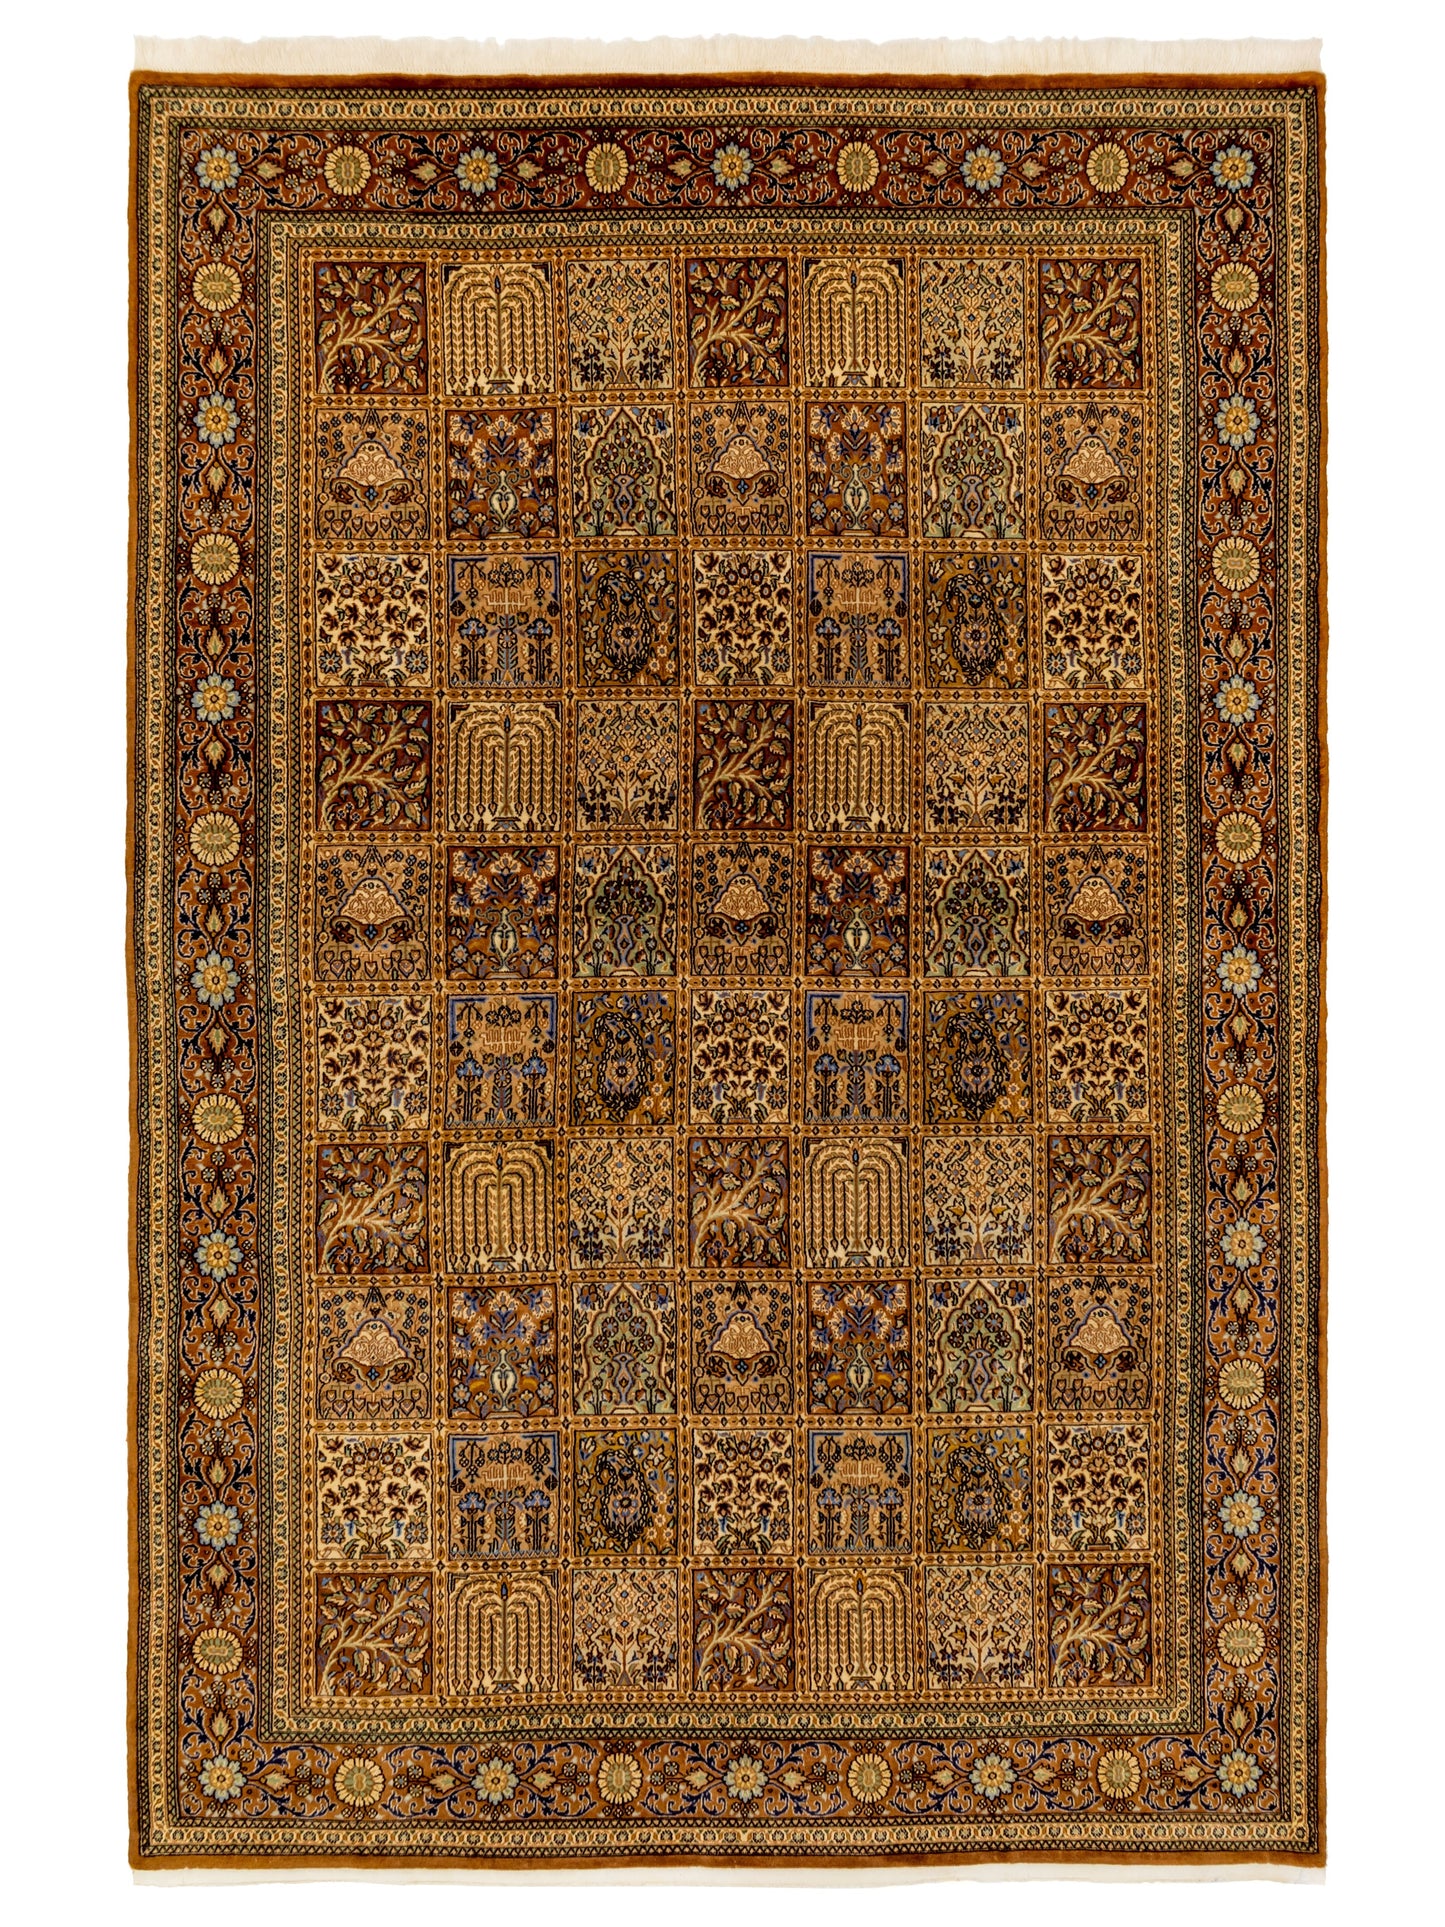 Hand-knotted Persian Wool Brown Rug "4 seasons" product image #29703128252586